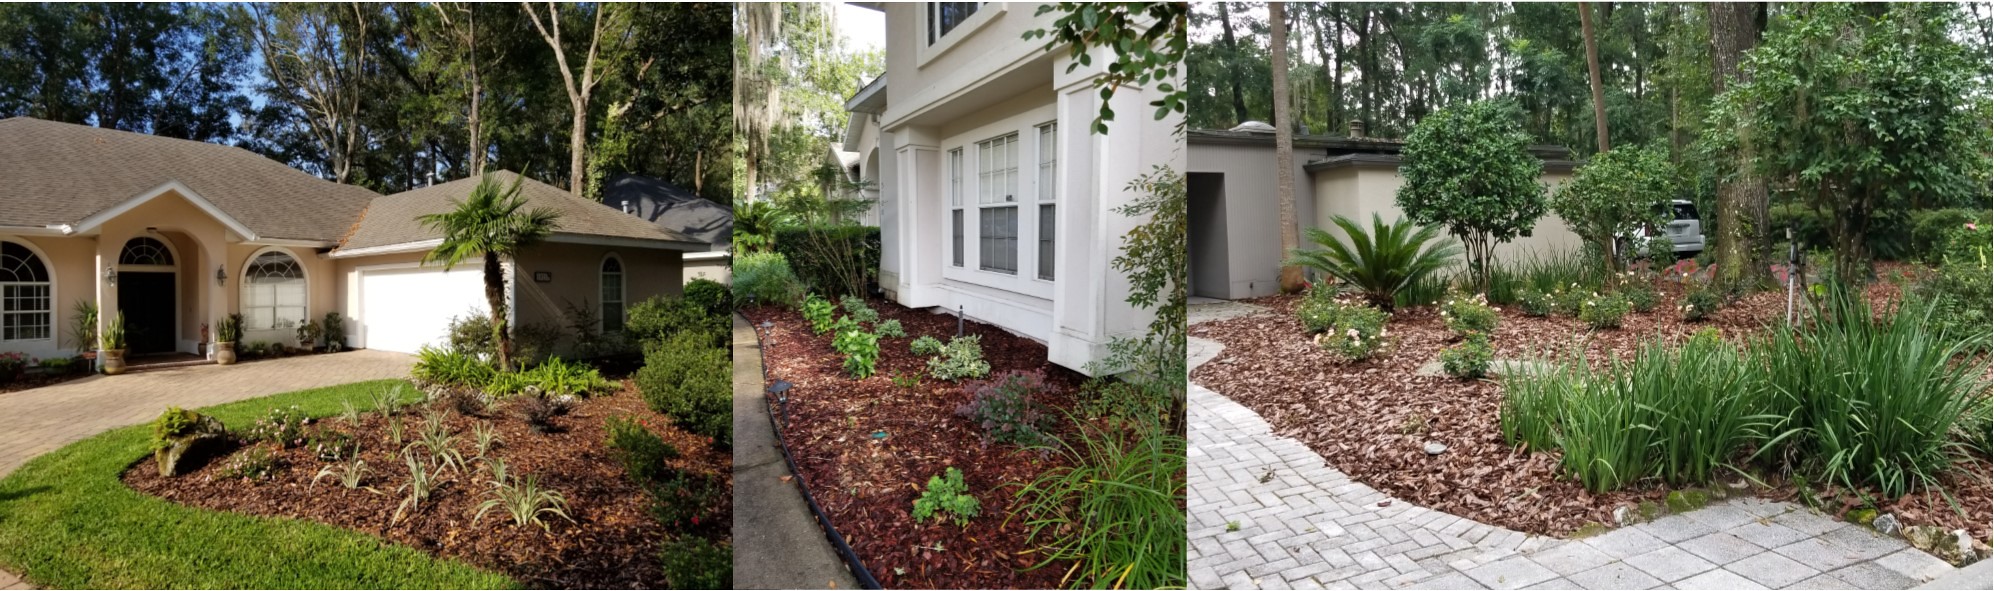 florida friendly landscaping